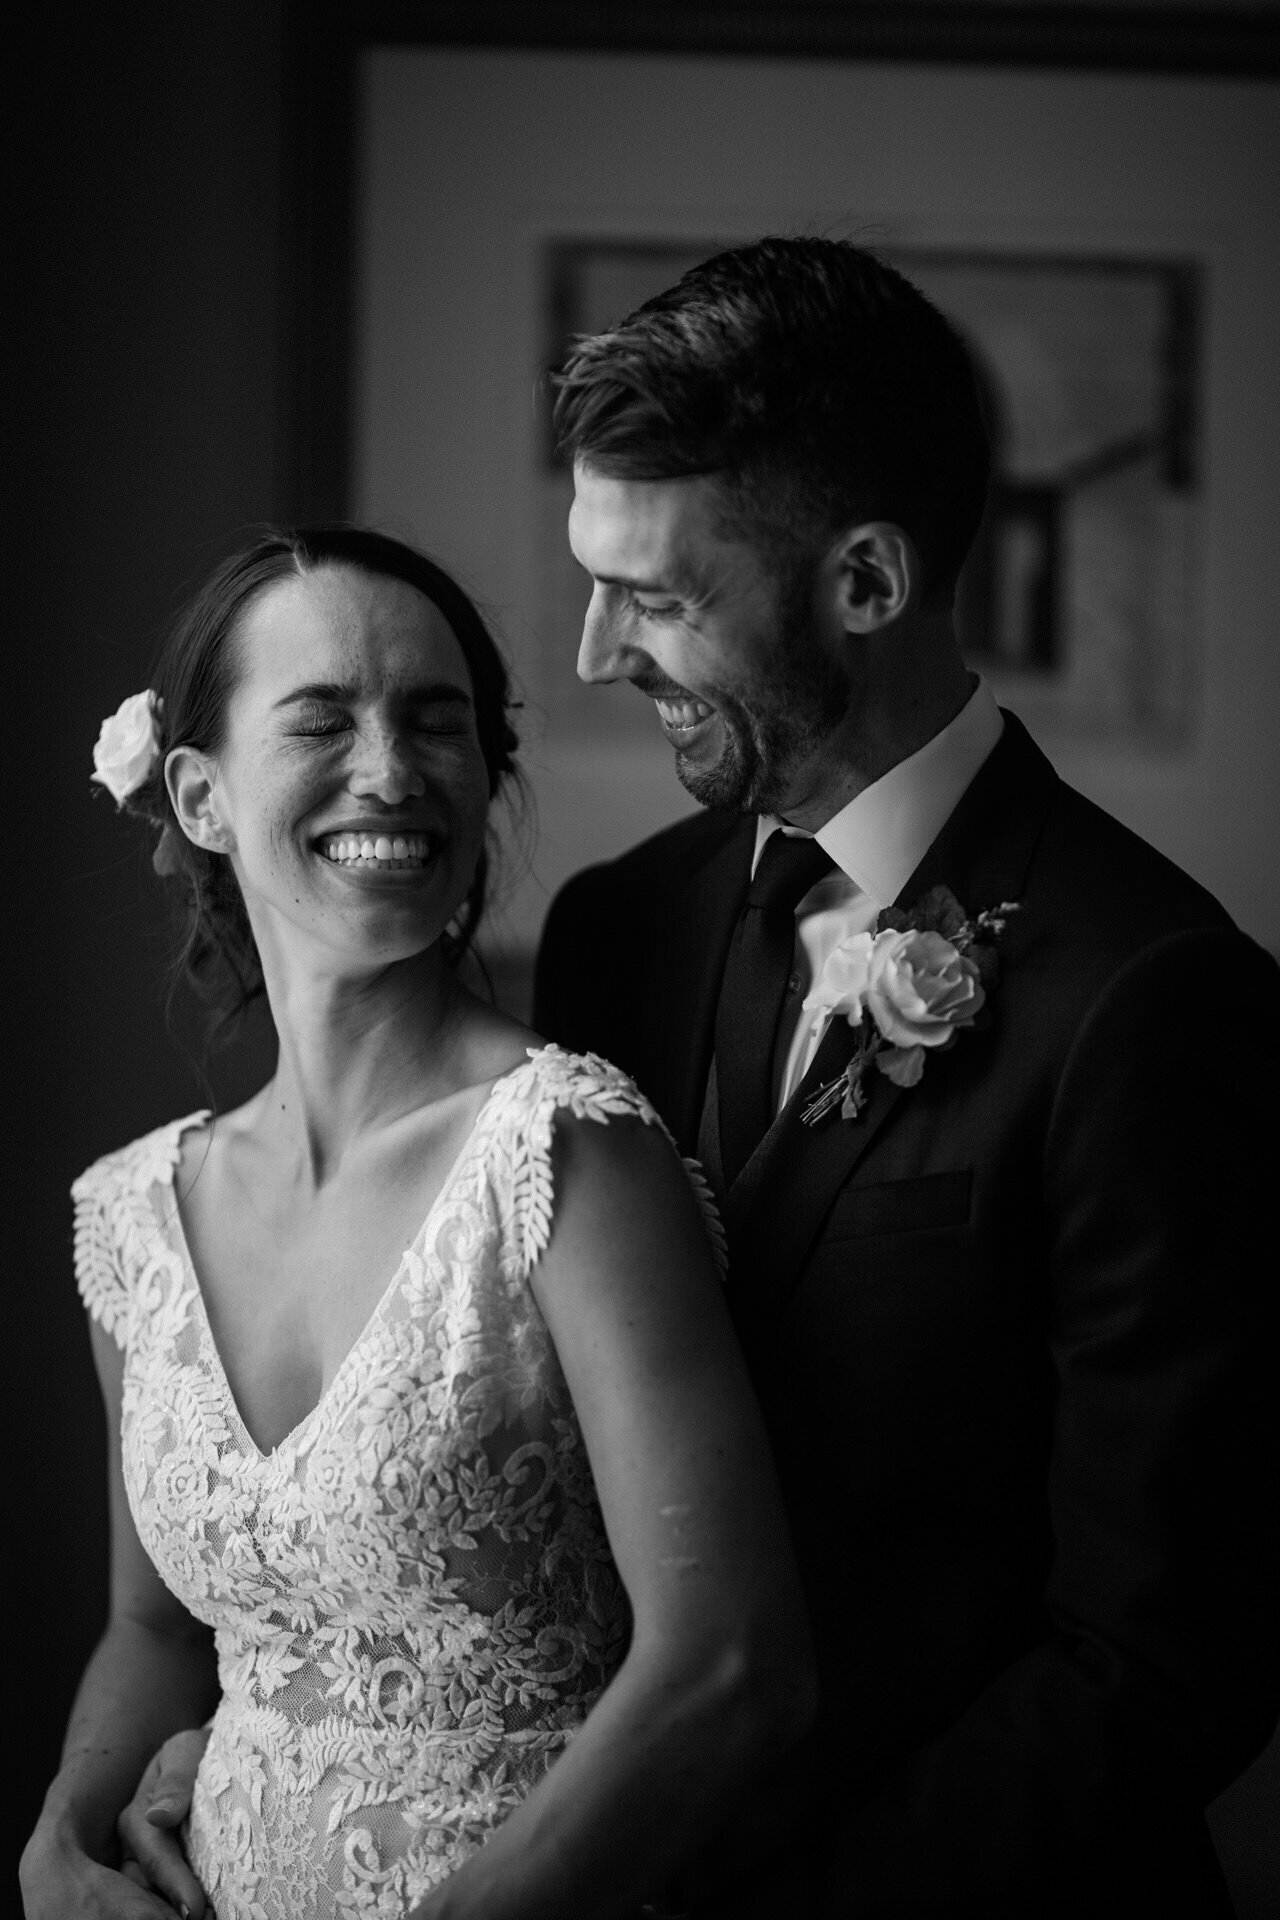 Bride and groom laughing together in black and white RVA Shawnee Custalow Queer Wedding Photographer